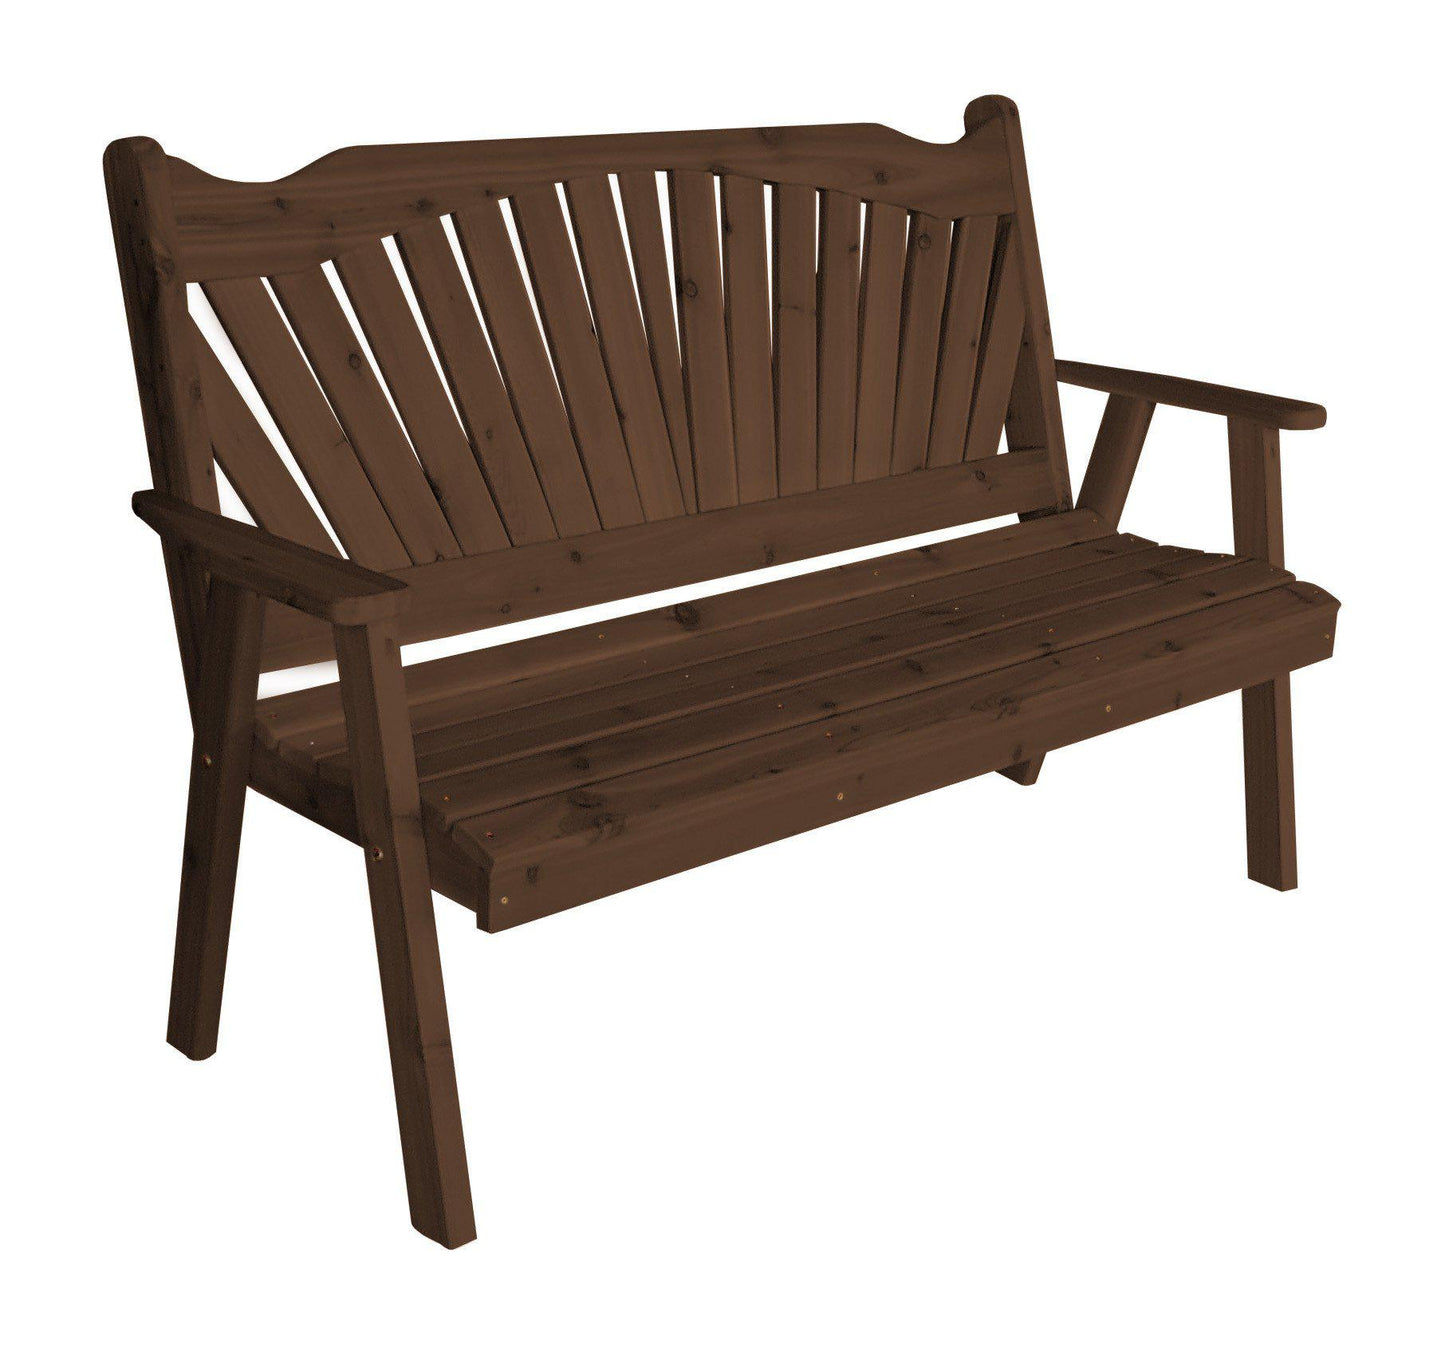 A&L Furniture Co. Western Red Cedar 6' Fanback Garden Bench - LEAD TIME TO SHIP 4 WEEKS OR LESS